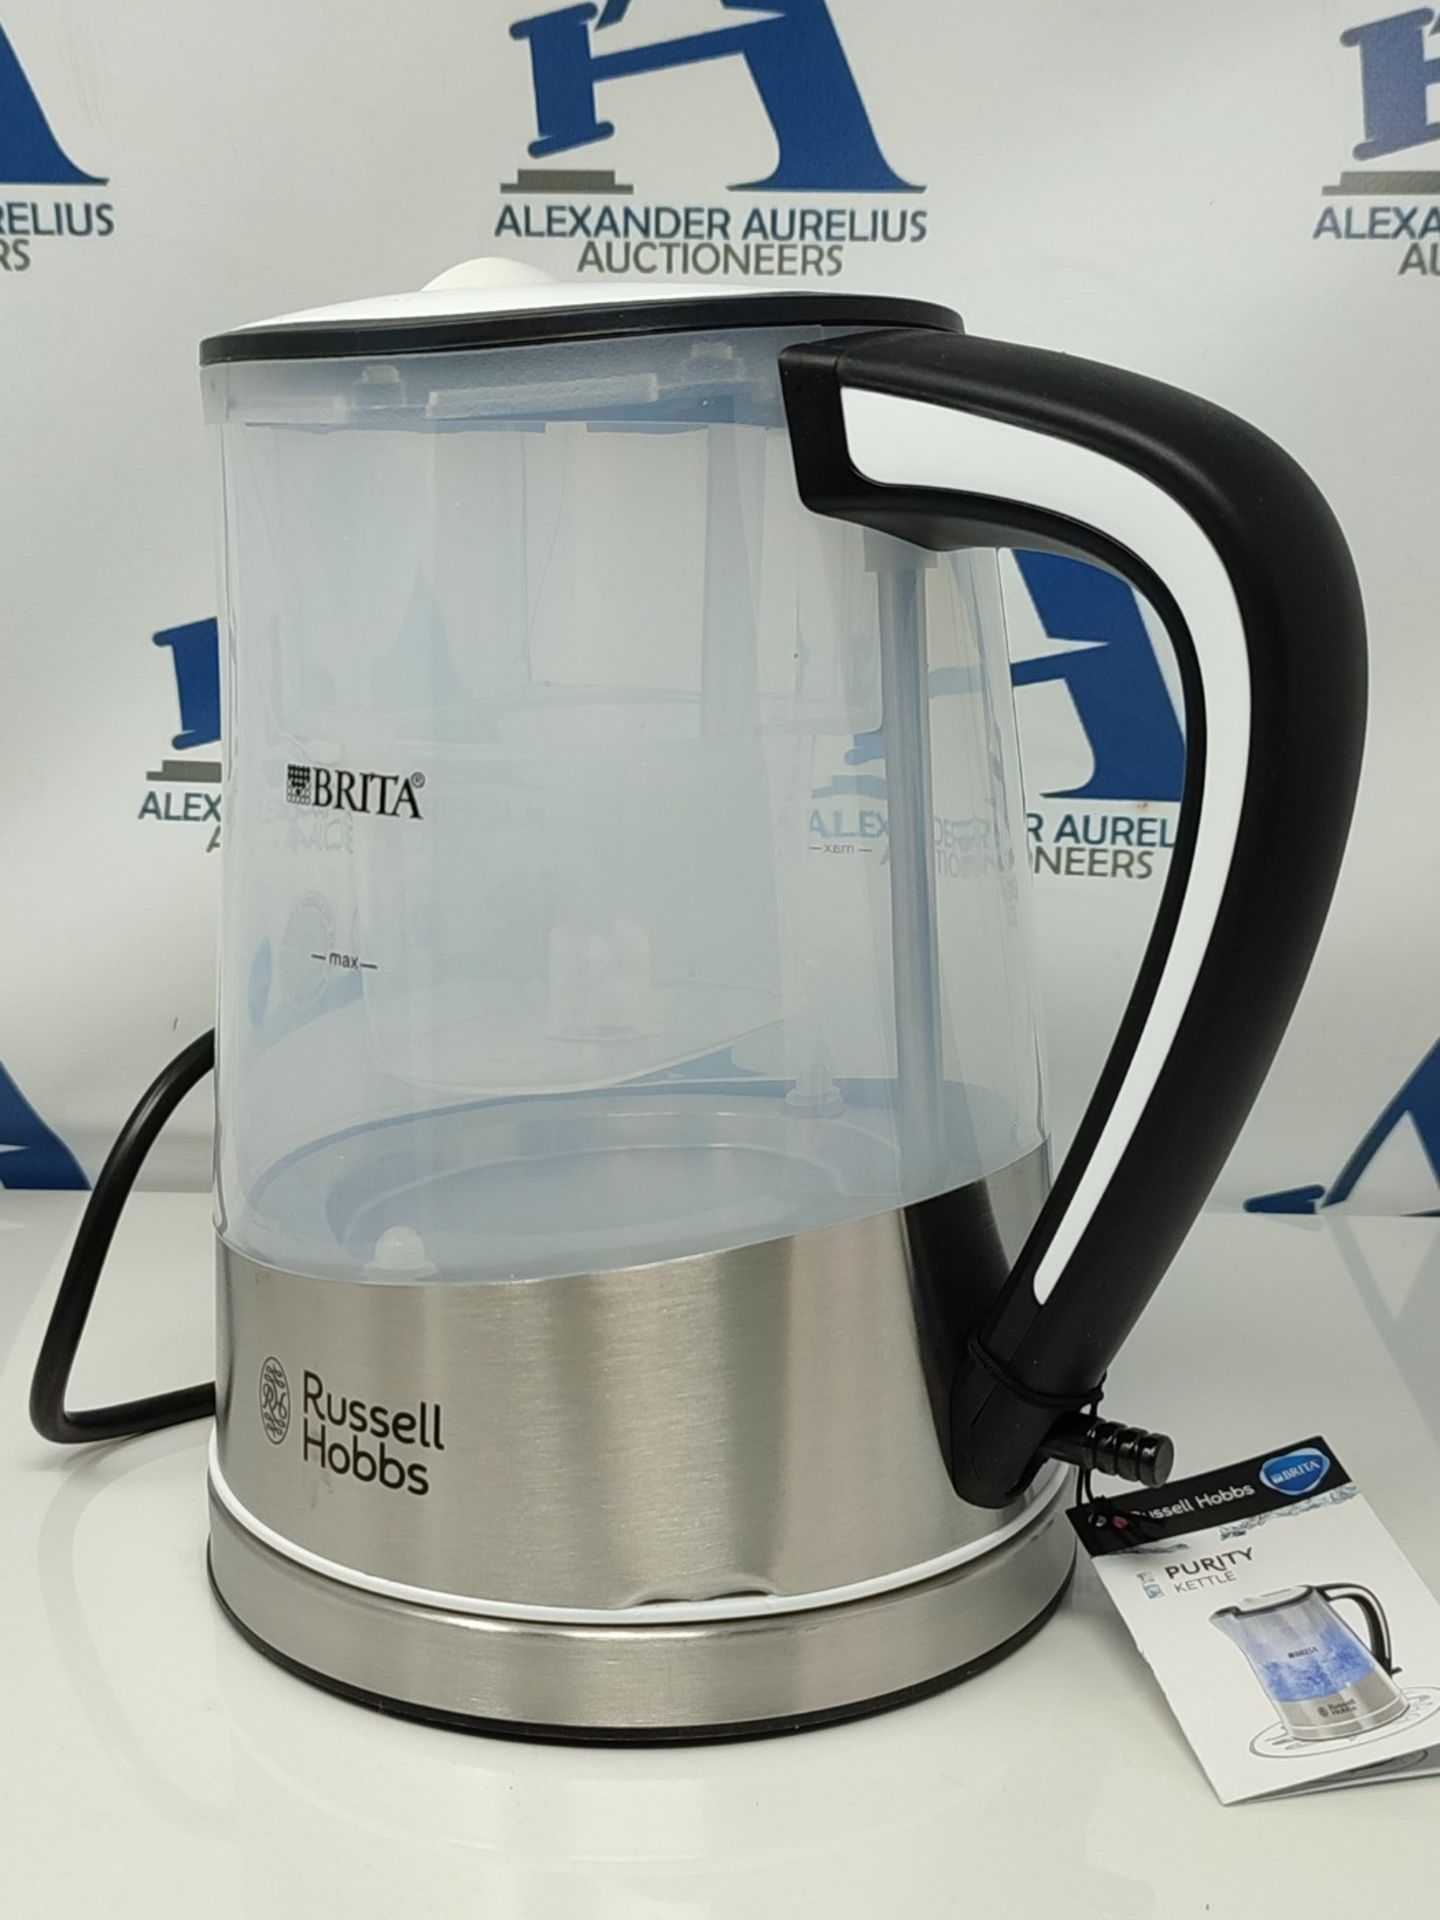 Russell Hobbs 22851 Brita Filter Purity Electric Kettle, Illuminating Filter Kettle wi - Image 2 of 2